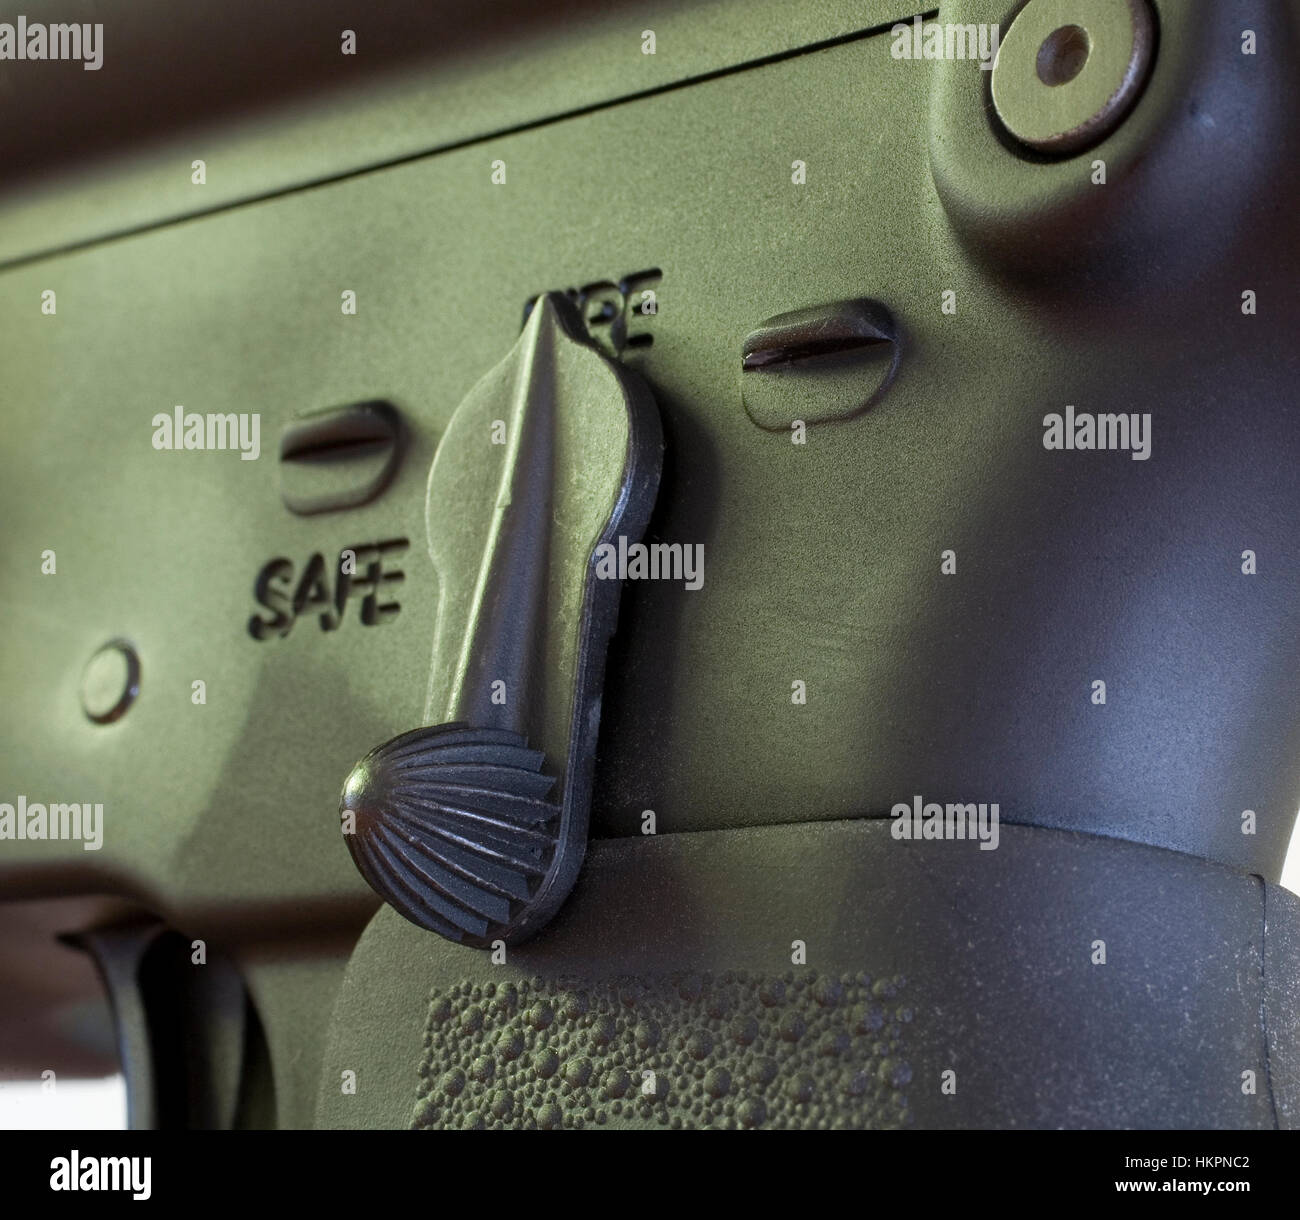 Safety that is disengaged on an Ar15 assault rifle Stock Photo